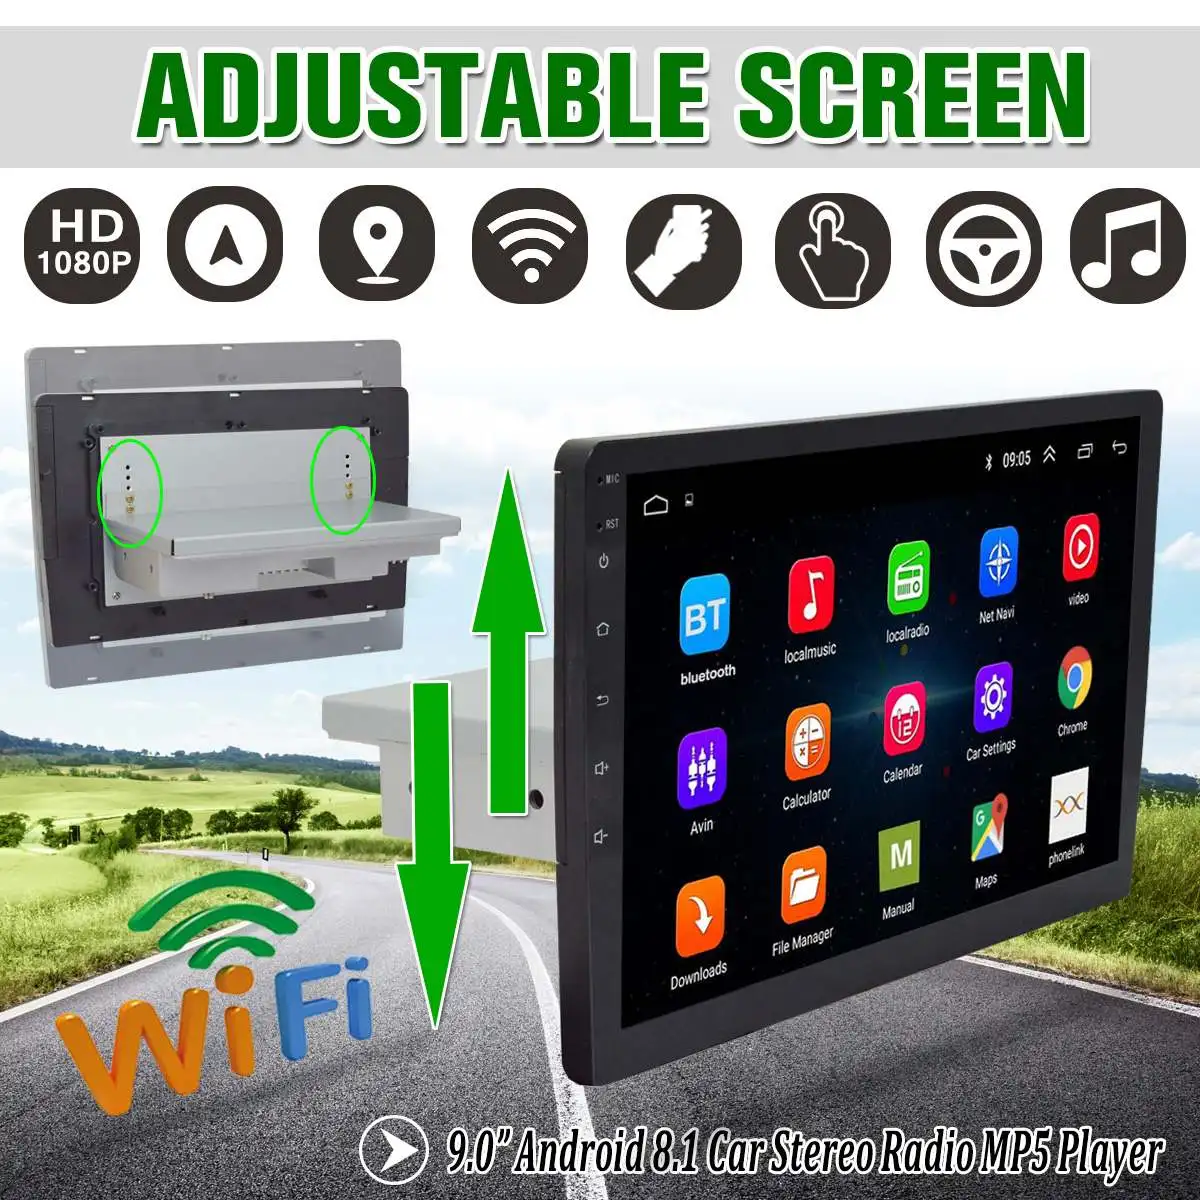 

Android 8.1 1 DIN Car Radio Adjustable With Touch Screen 1G+16G 9/10 Inch Car Stereo WiFi bluetooth FM Radio GPS Nav Player